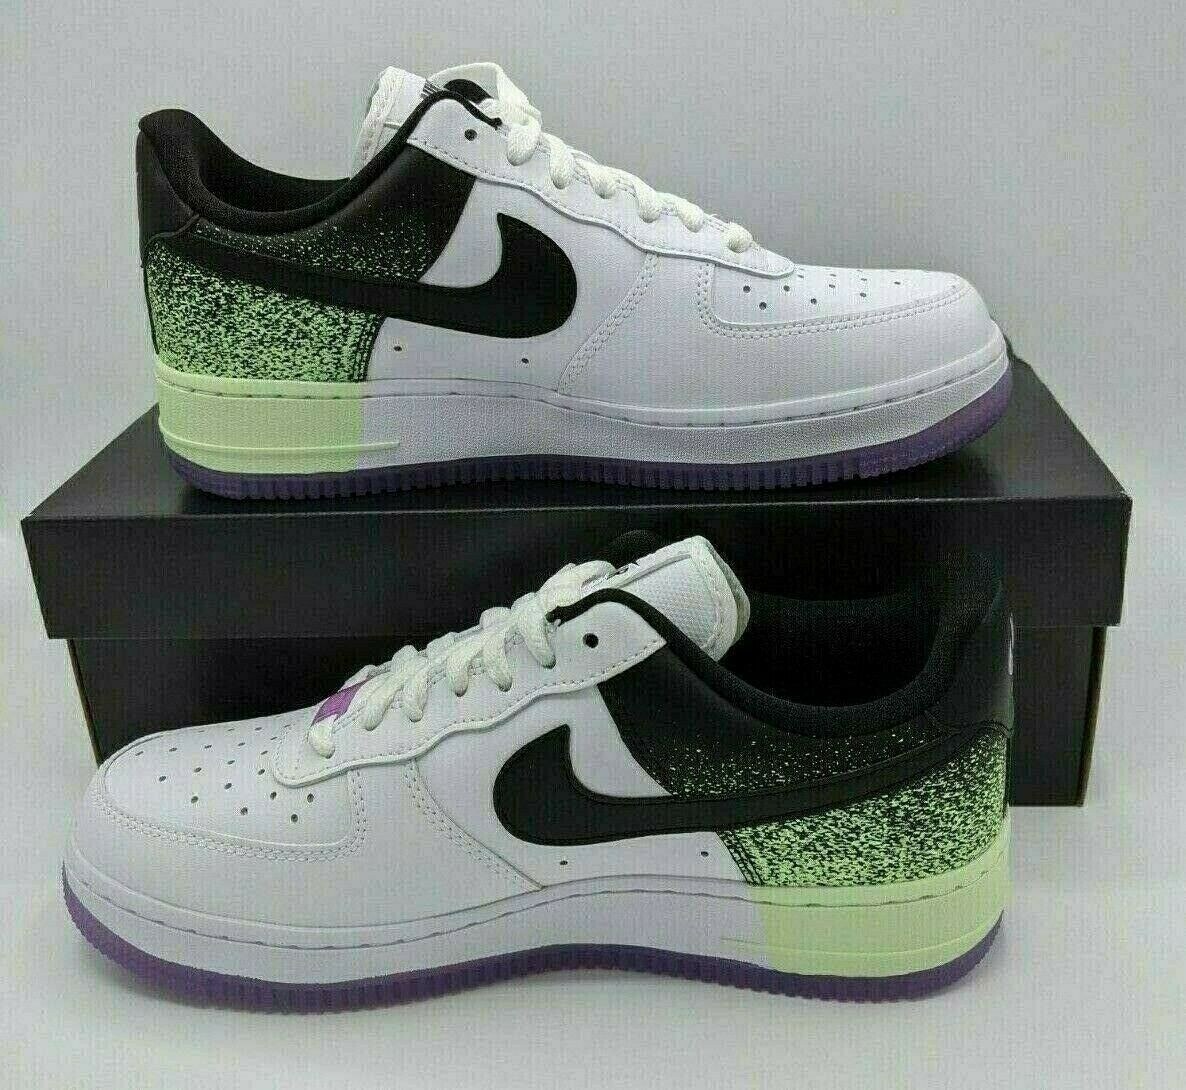 NWB Nike Womens Size 8 Air Force 1 07 White Black Barely Volt CZ8097-100 Shoes